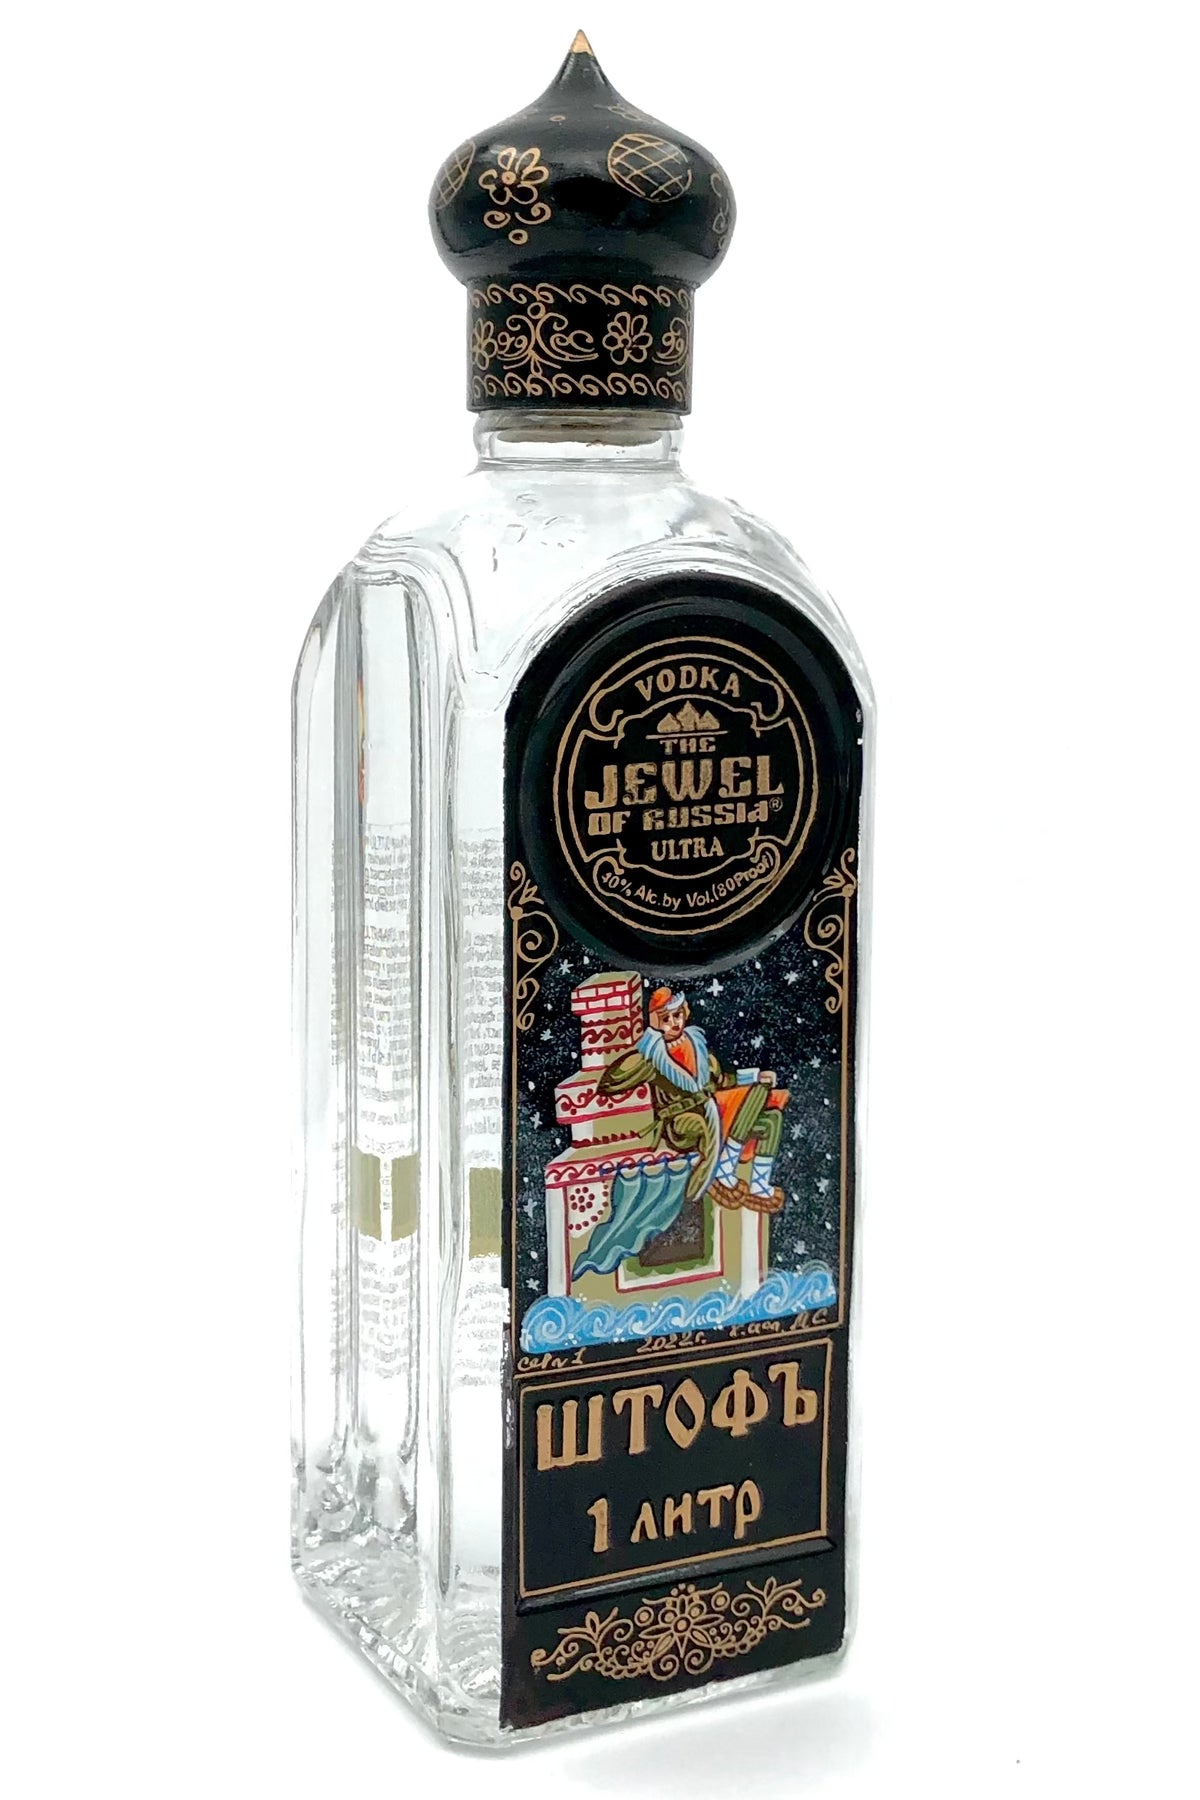 Jewel of Russia Ultra Vodka Hand-Painted Label